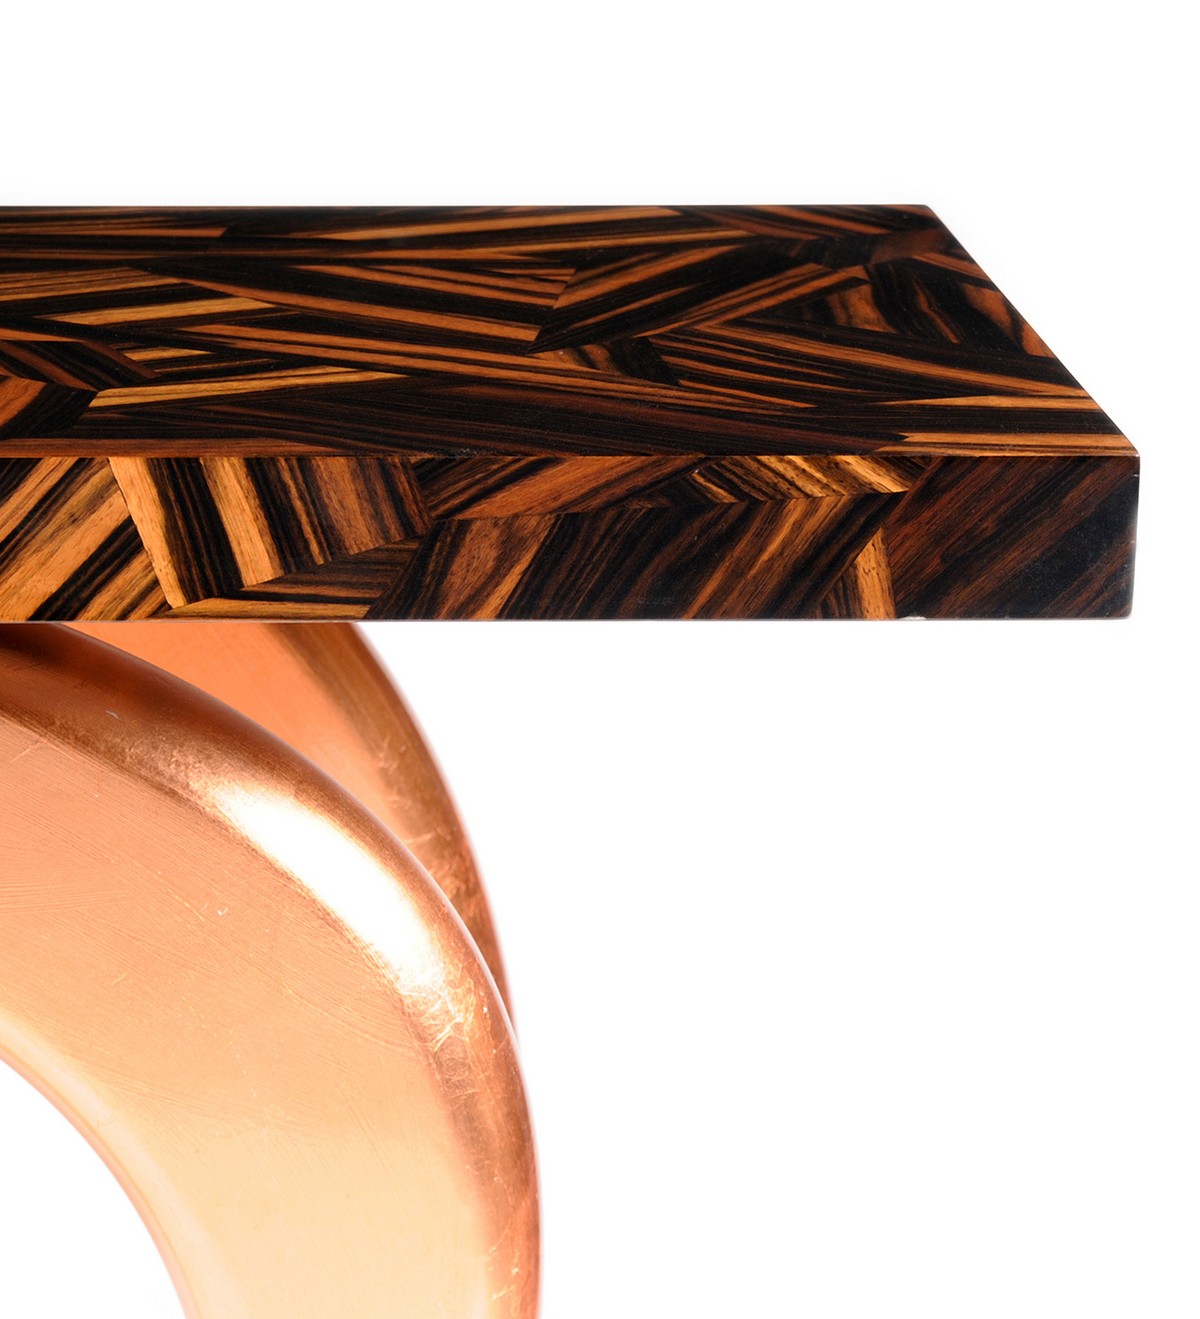 The Infinity Console: A Touch of Boldness To Your Living Room Decor